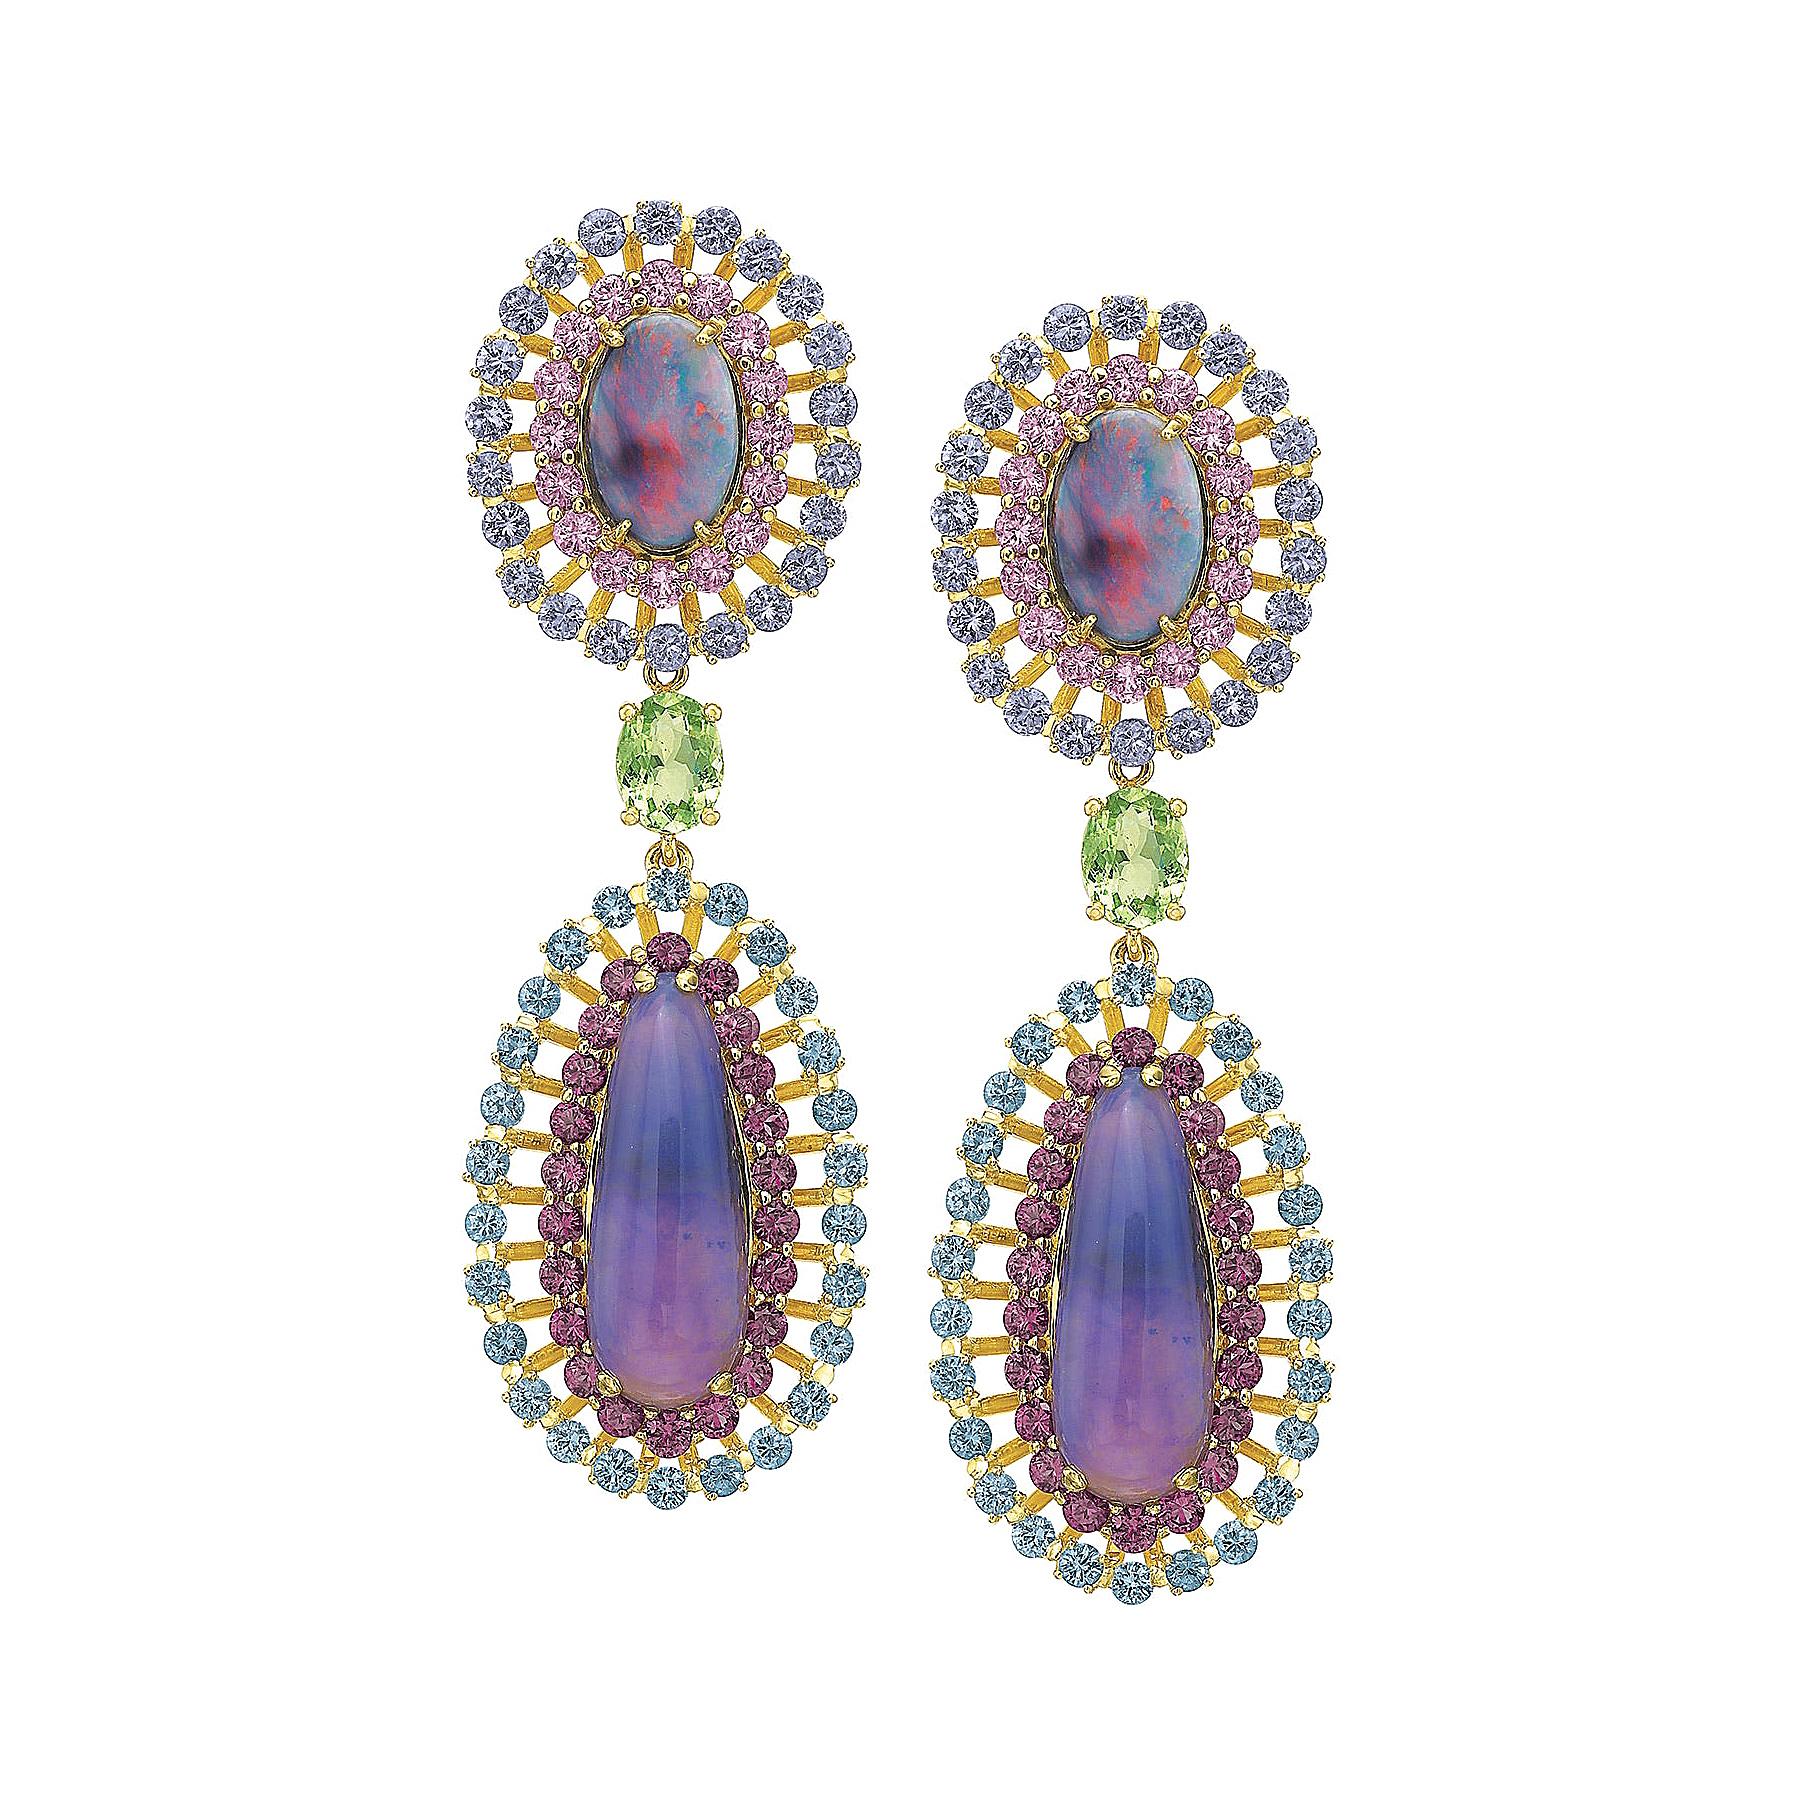 Opal, Tourmaline and Multicolored Spinel Earrings by Andrew Glassford